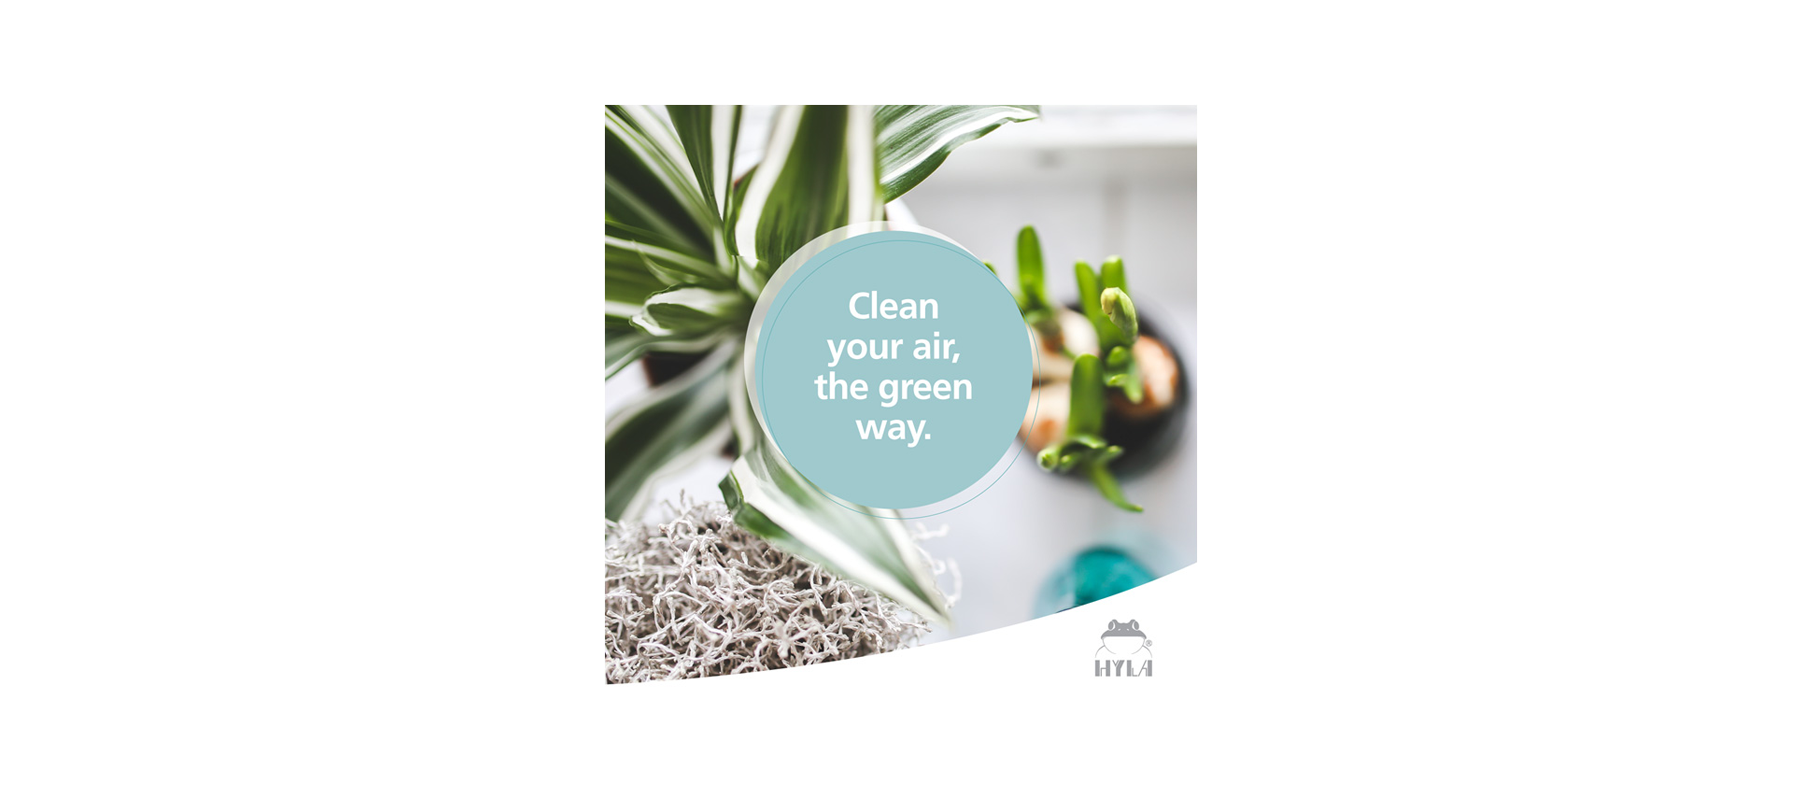 Clean your air, the green way!